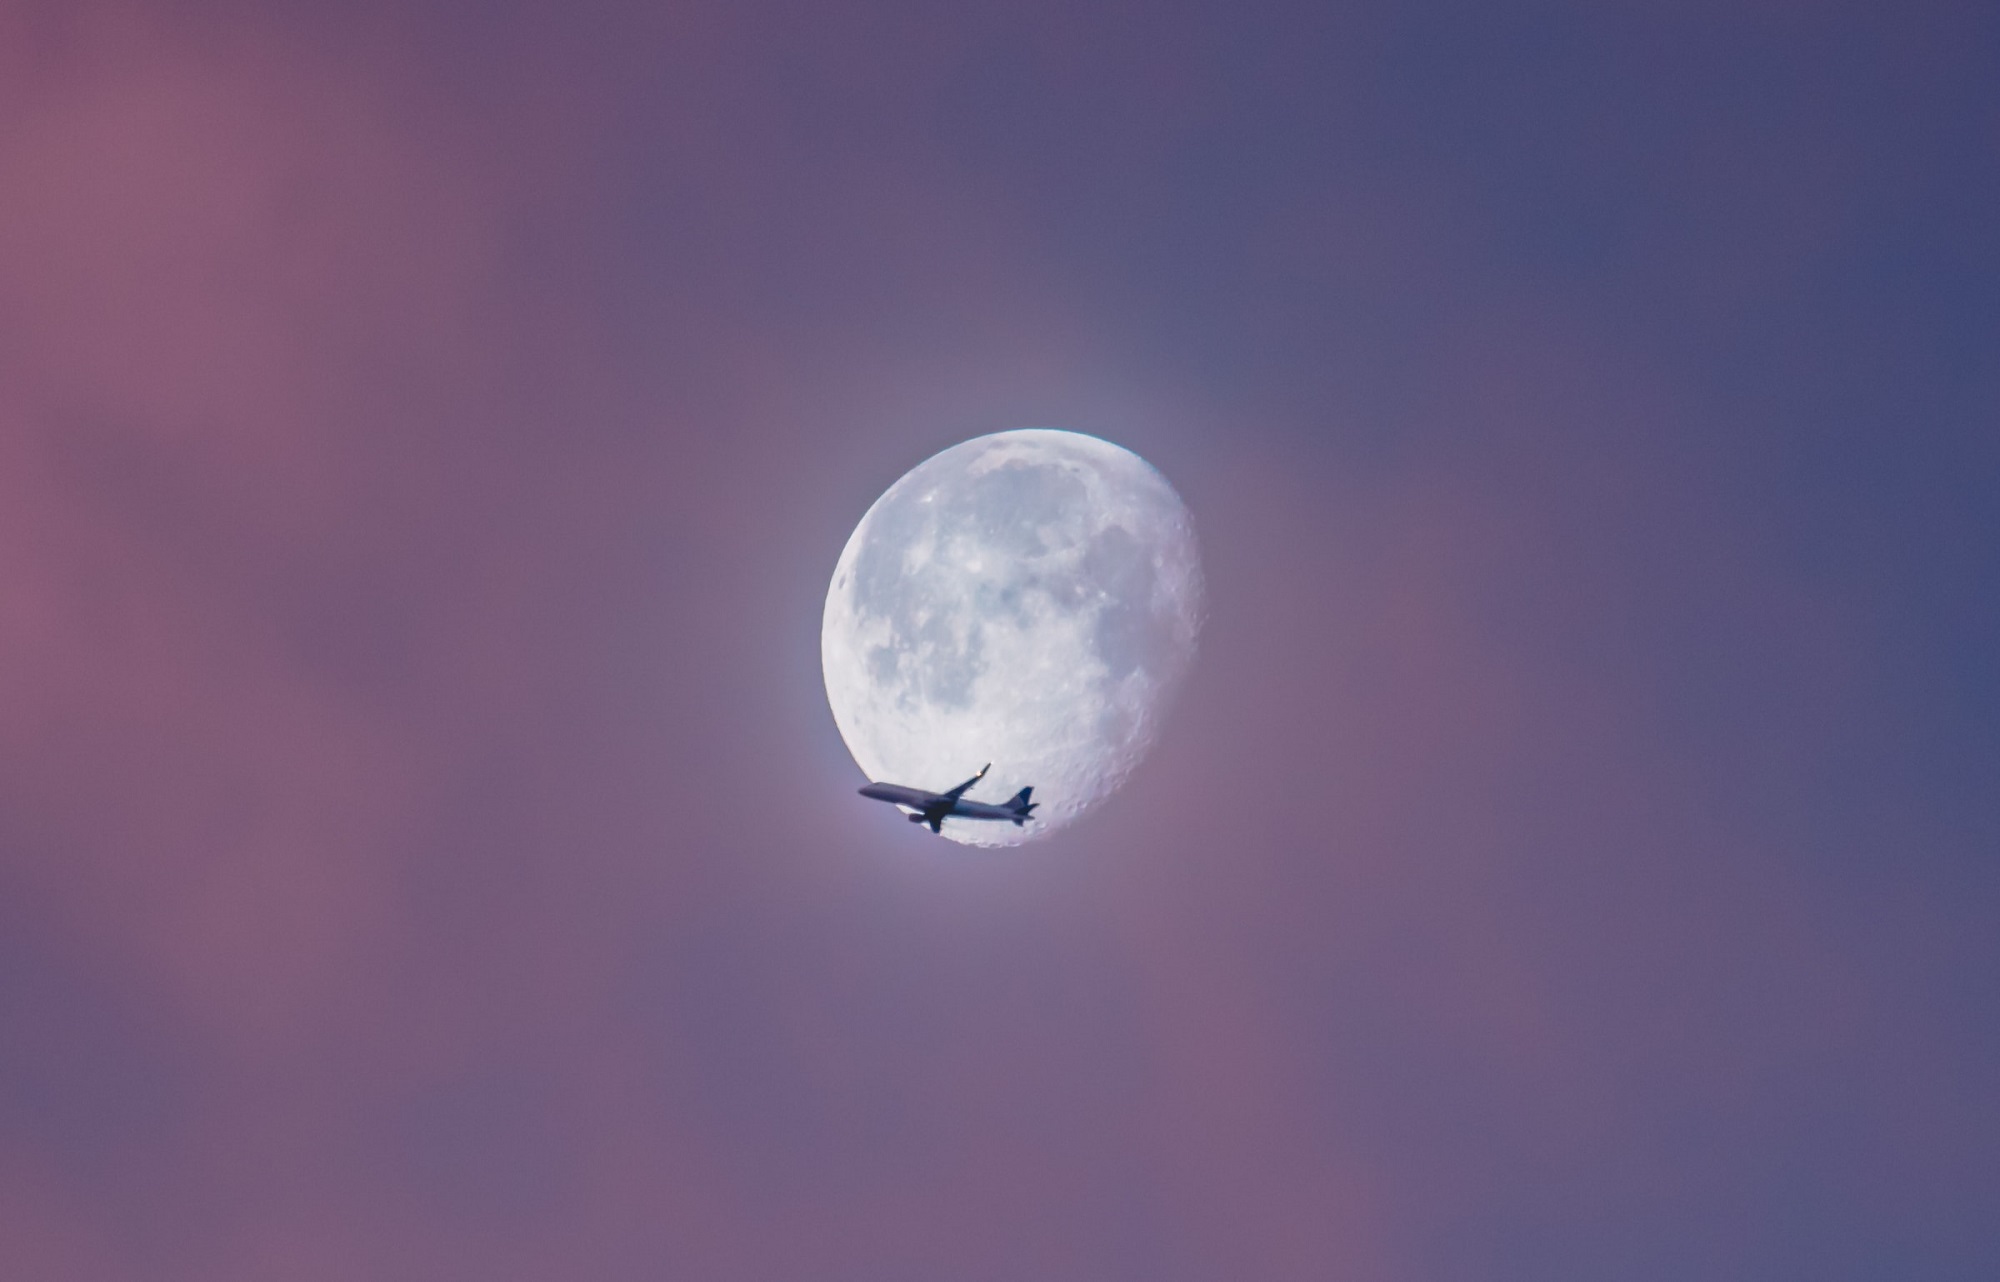 Commercial airplane flying across almost full moon. The question is: Are long flights safe?